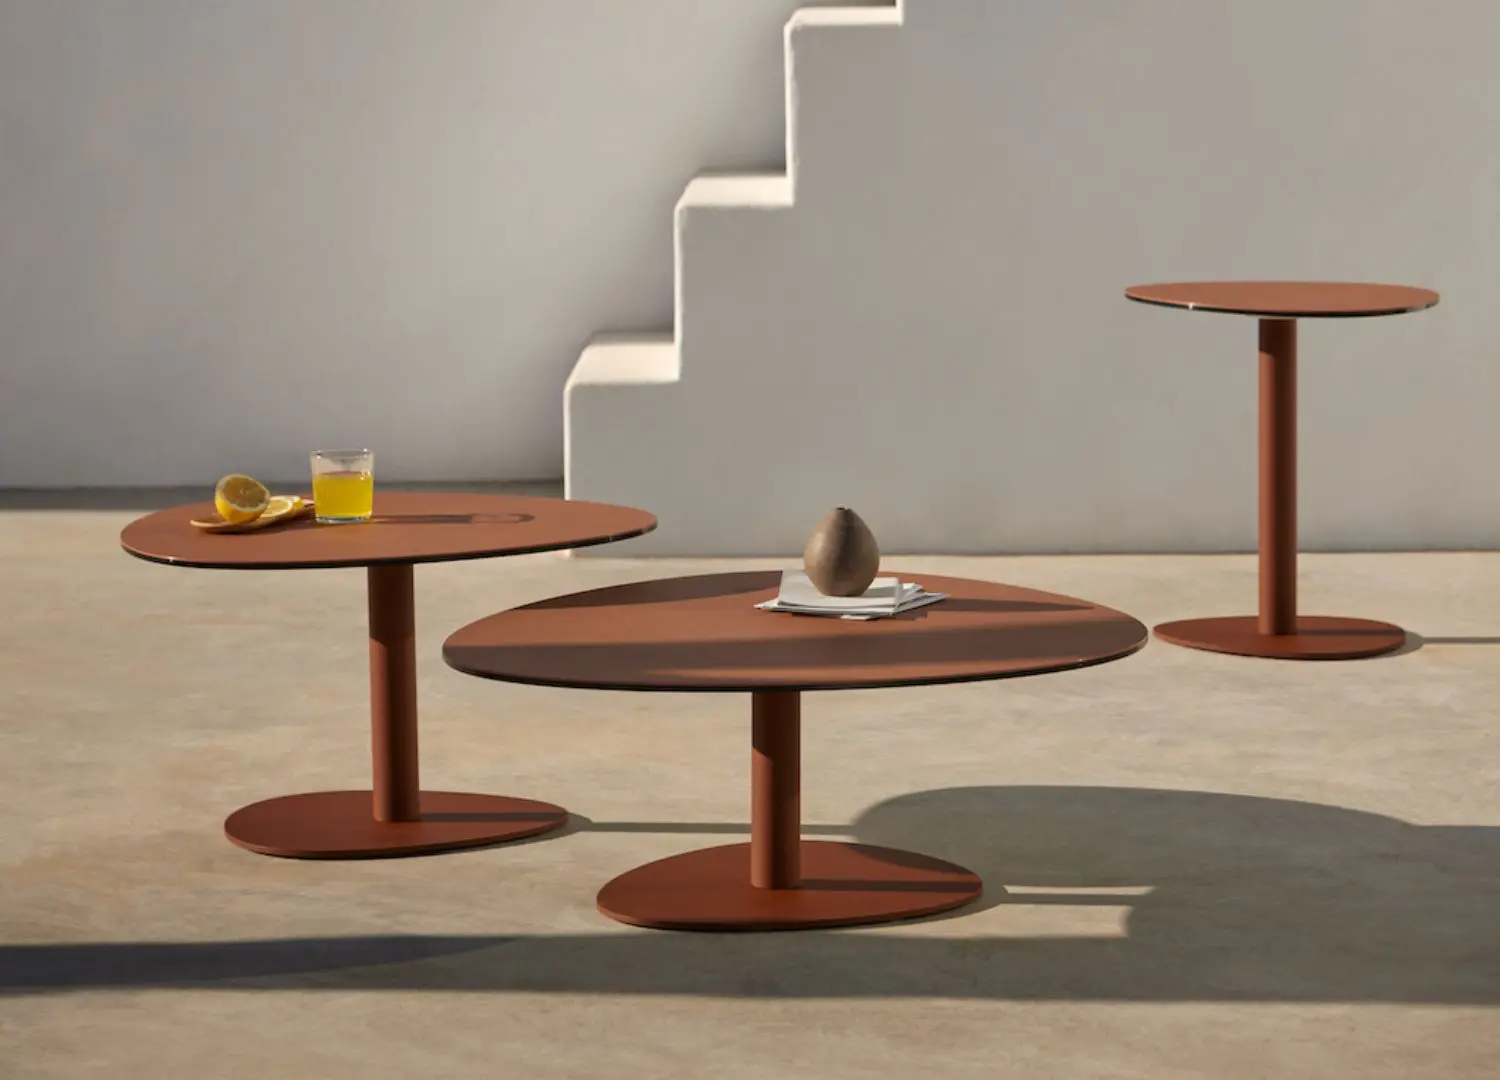 The Stone collection of coffee tables by Musola